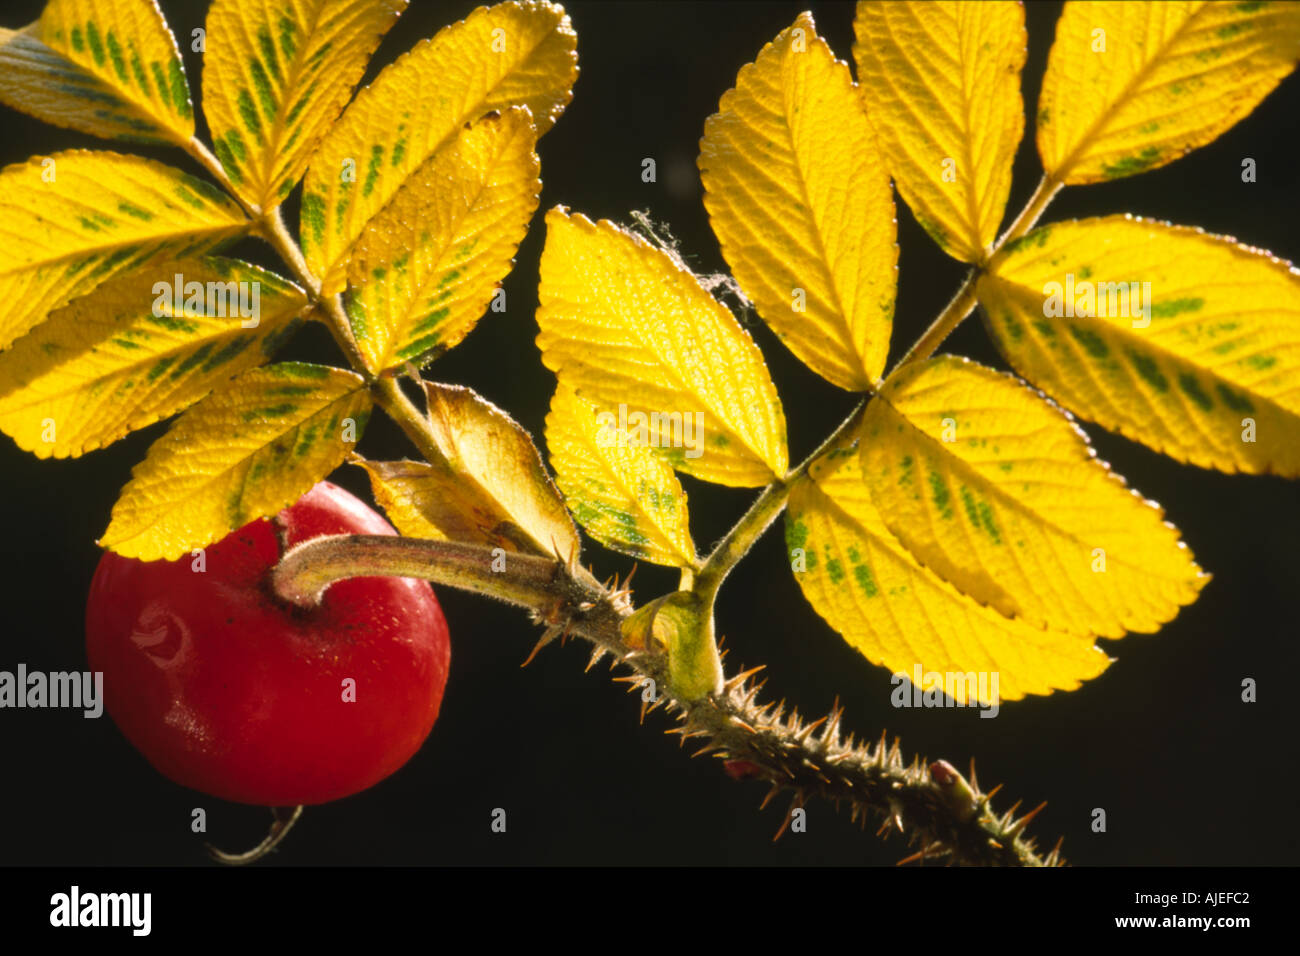 Hedging rose rosa rugosa leaves and fruit Stock Photo